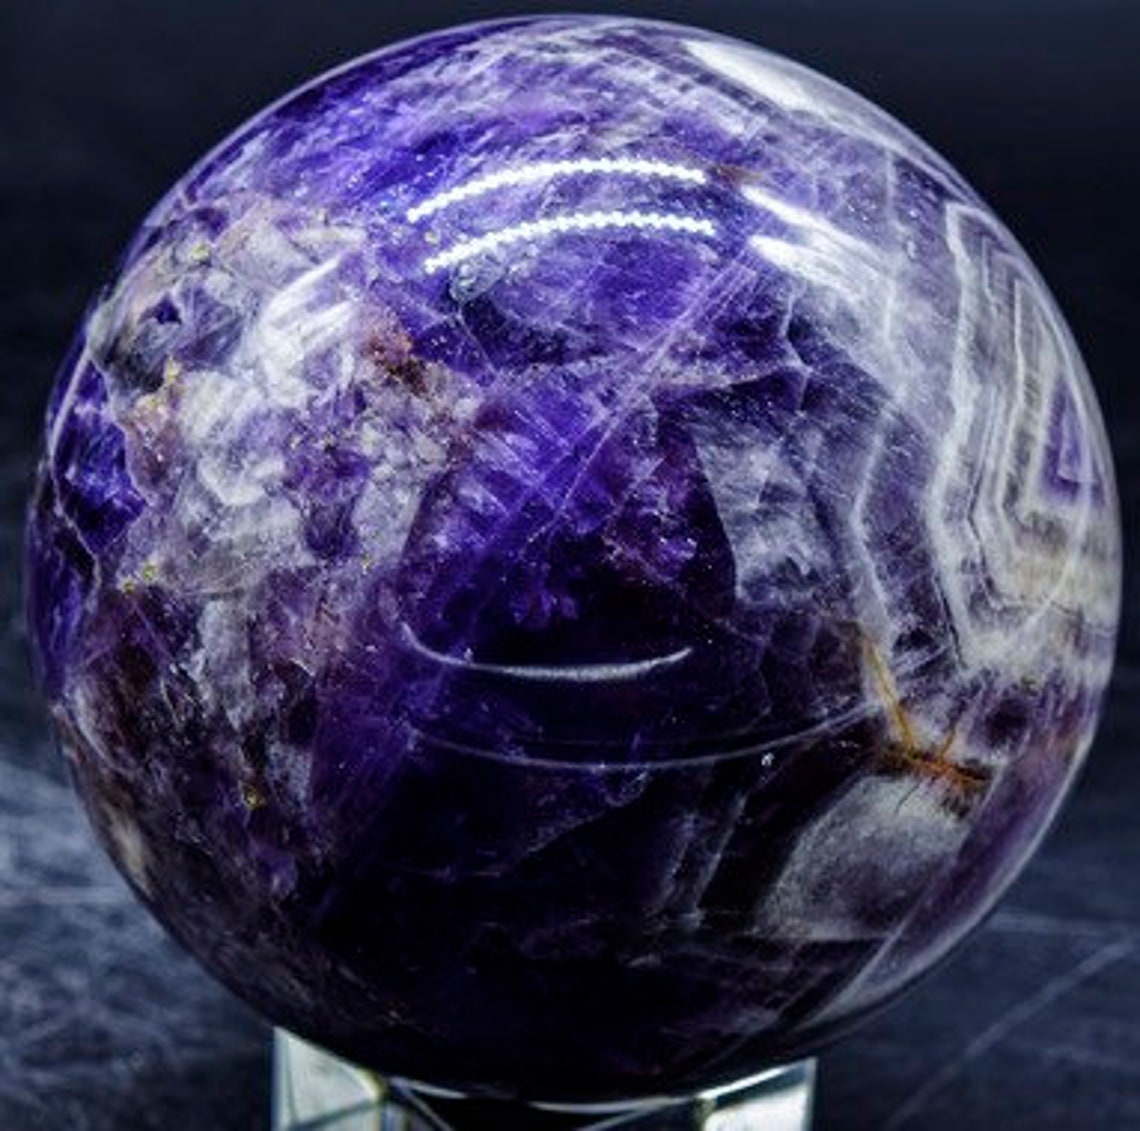 Chevron Amethyst Sphere 3.9 diameter and weighs over 3.9 | Etsy